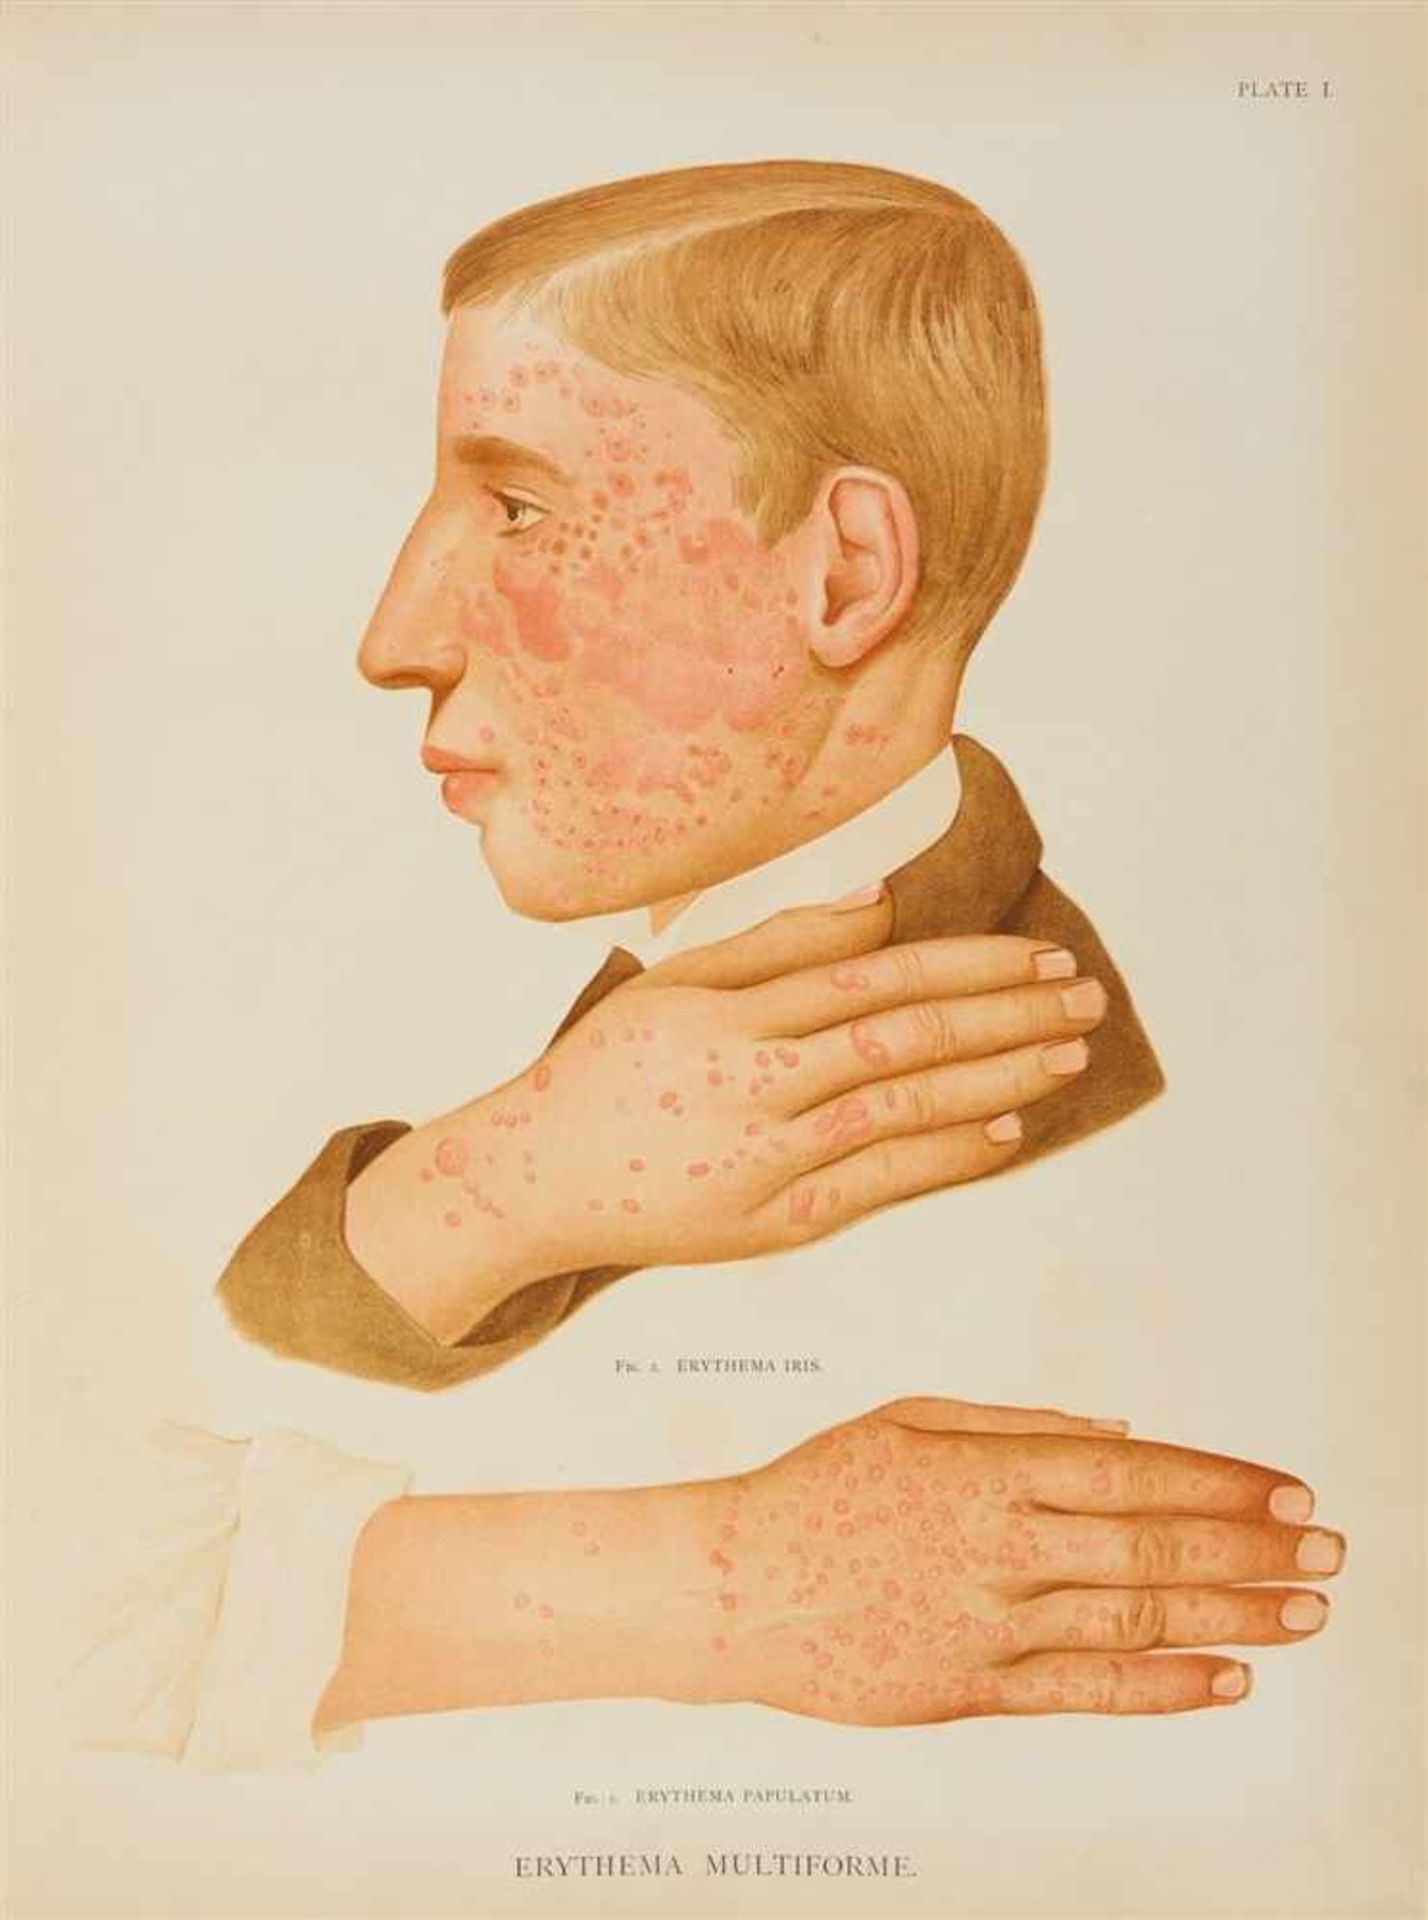 Crocker, Henry Radcliffe: Atlas of the diseases of the skin. In a series of illustrations from